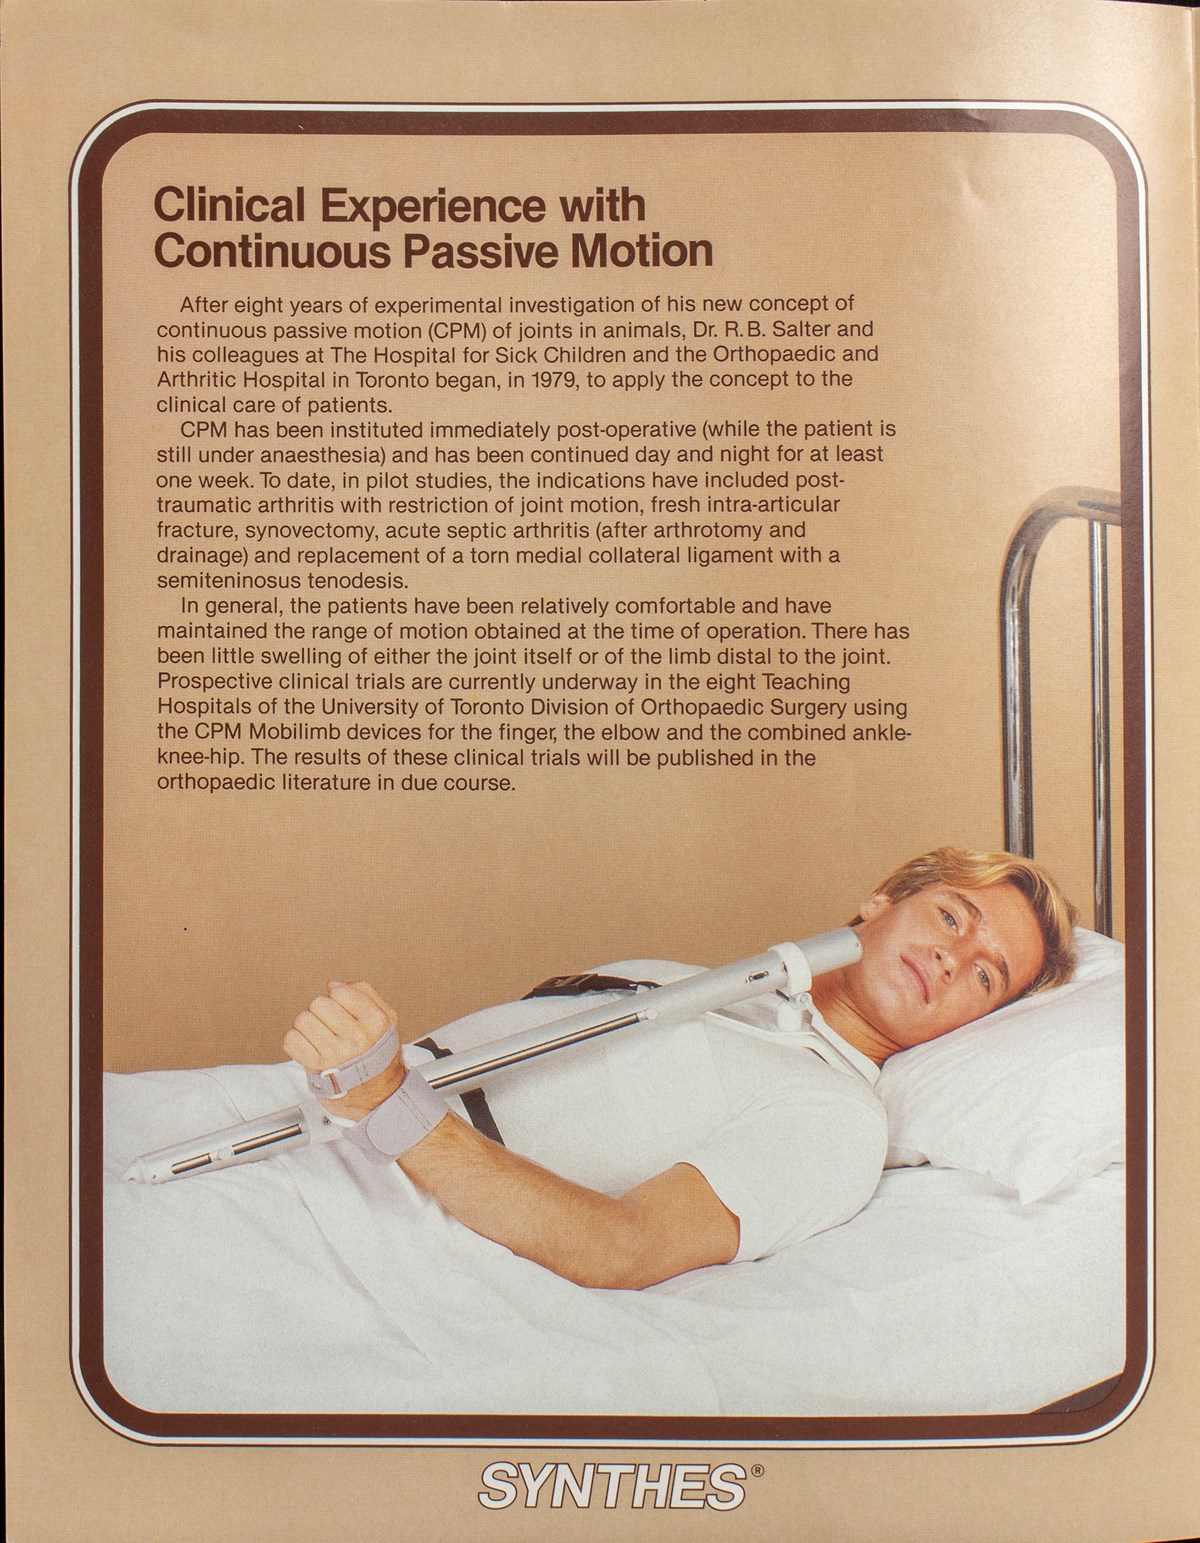 A poster of a man lying in a bed and wearing an orthotic device on arm that is connected to a bar that restricts his range of motion vertically. The headline reads "Clinical experience with continuous passive motion".